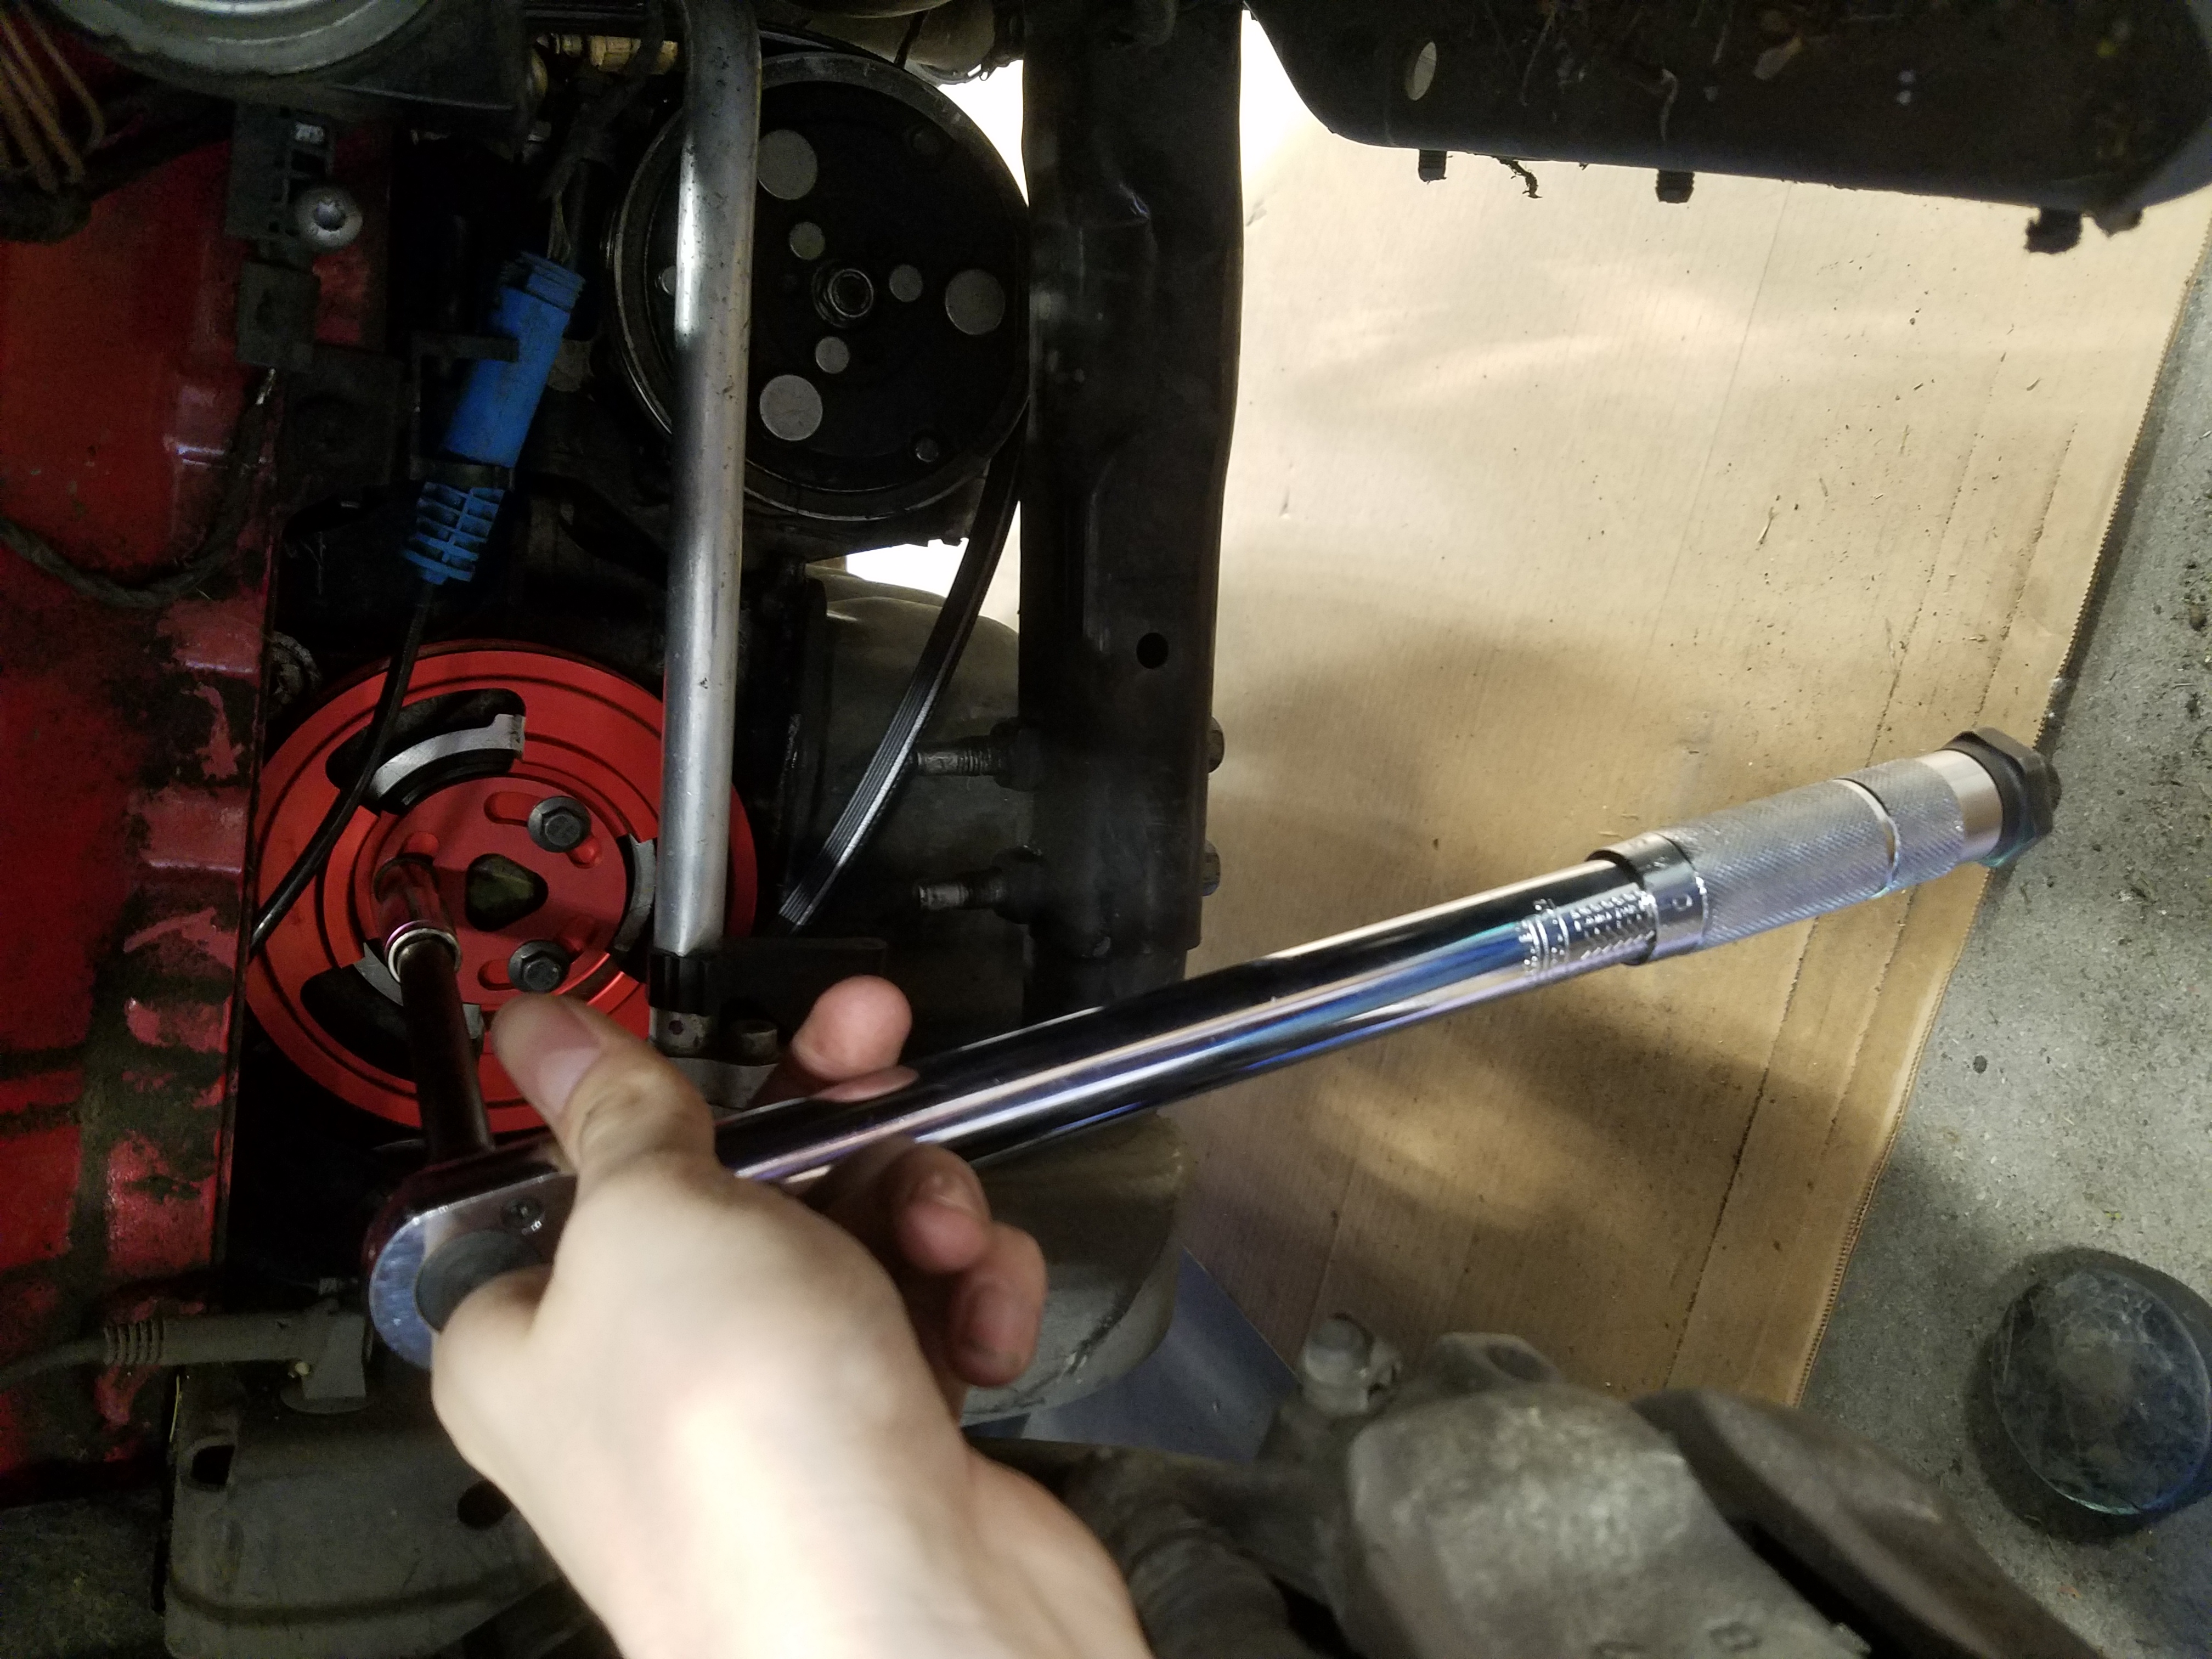 Tightening the bolt down.